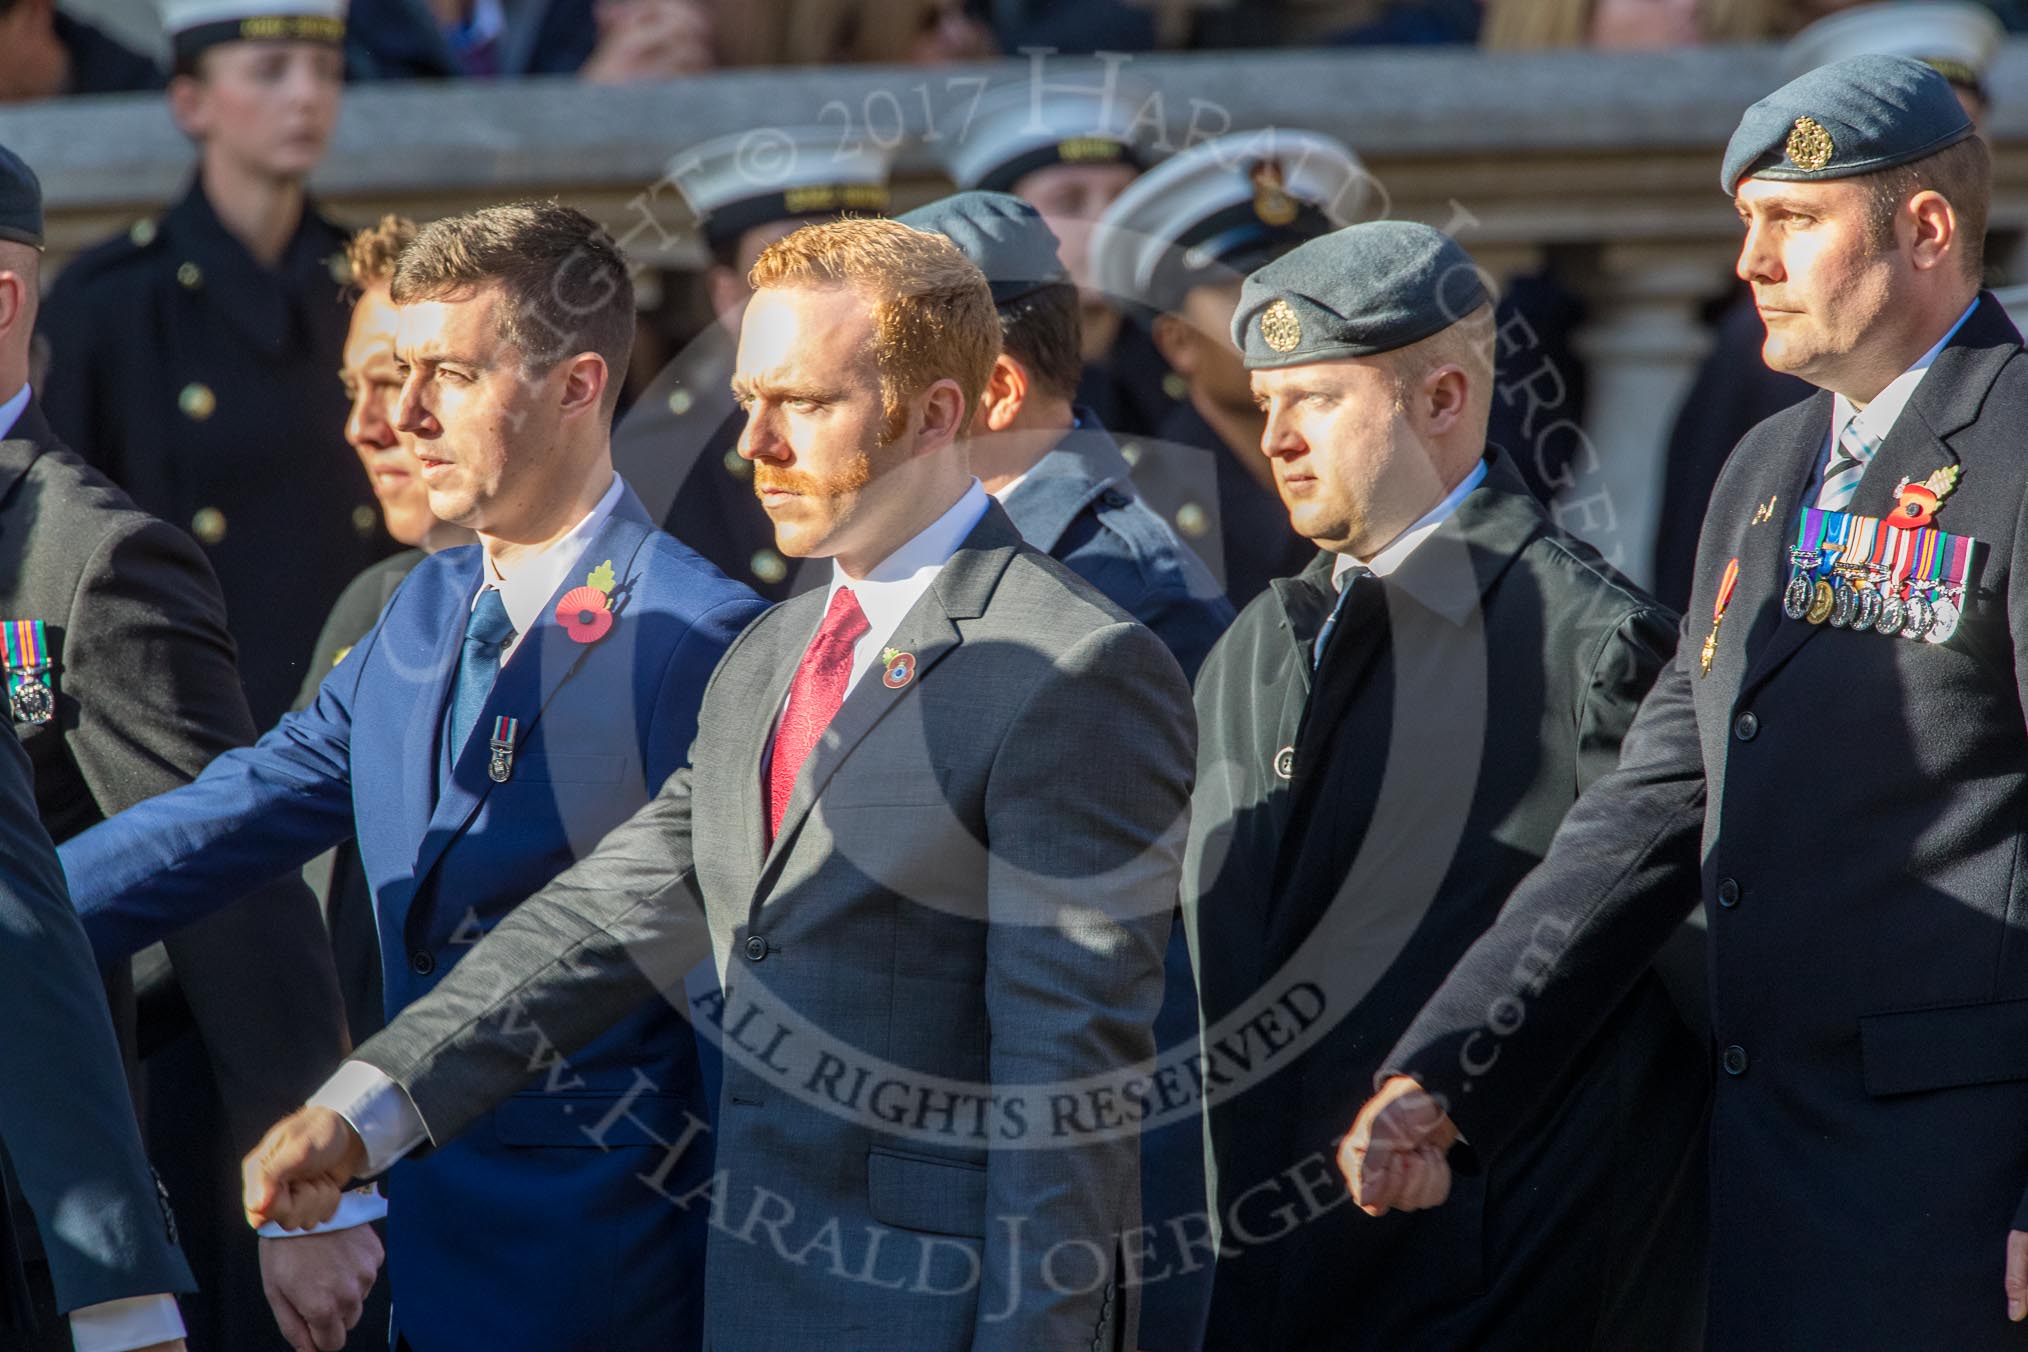 7 Squadron Association (Group C8, 20 members) during the Royal British Legion March Past on Remembrance Sunday at the Cenotaph, Whitehall, Westminster, London, 11 November 2018, 12:15.6.